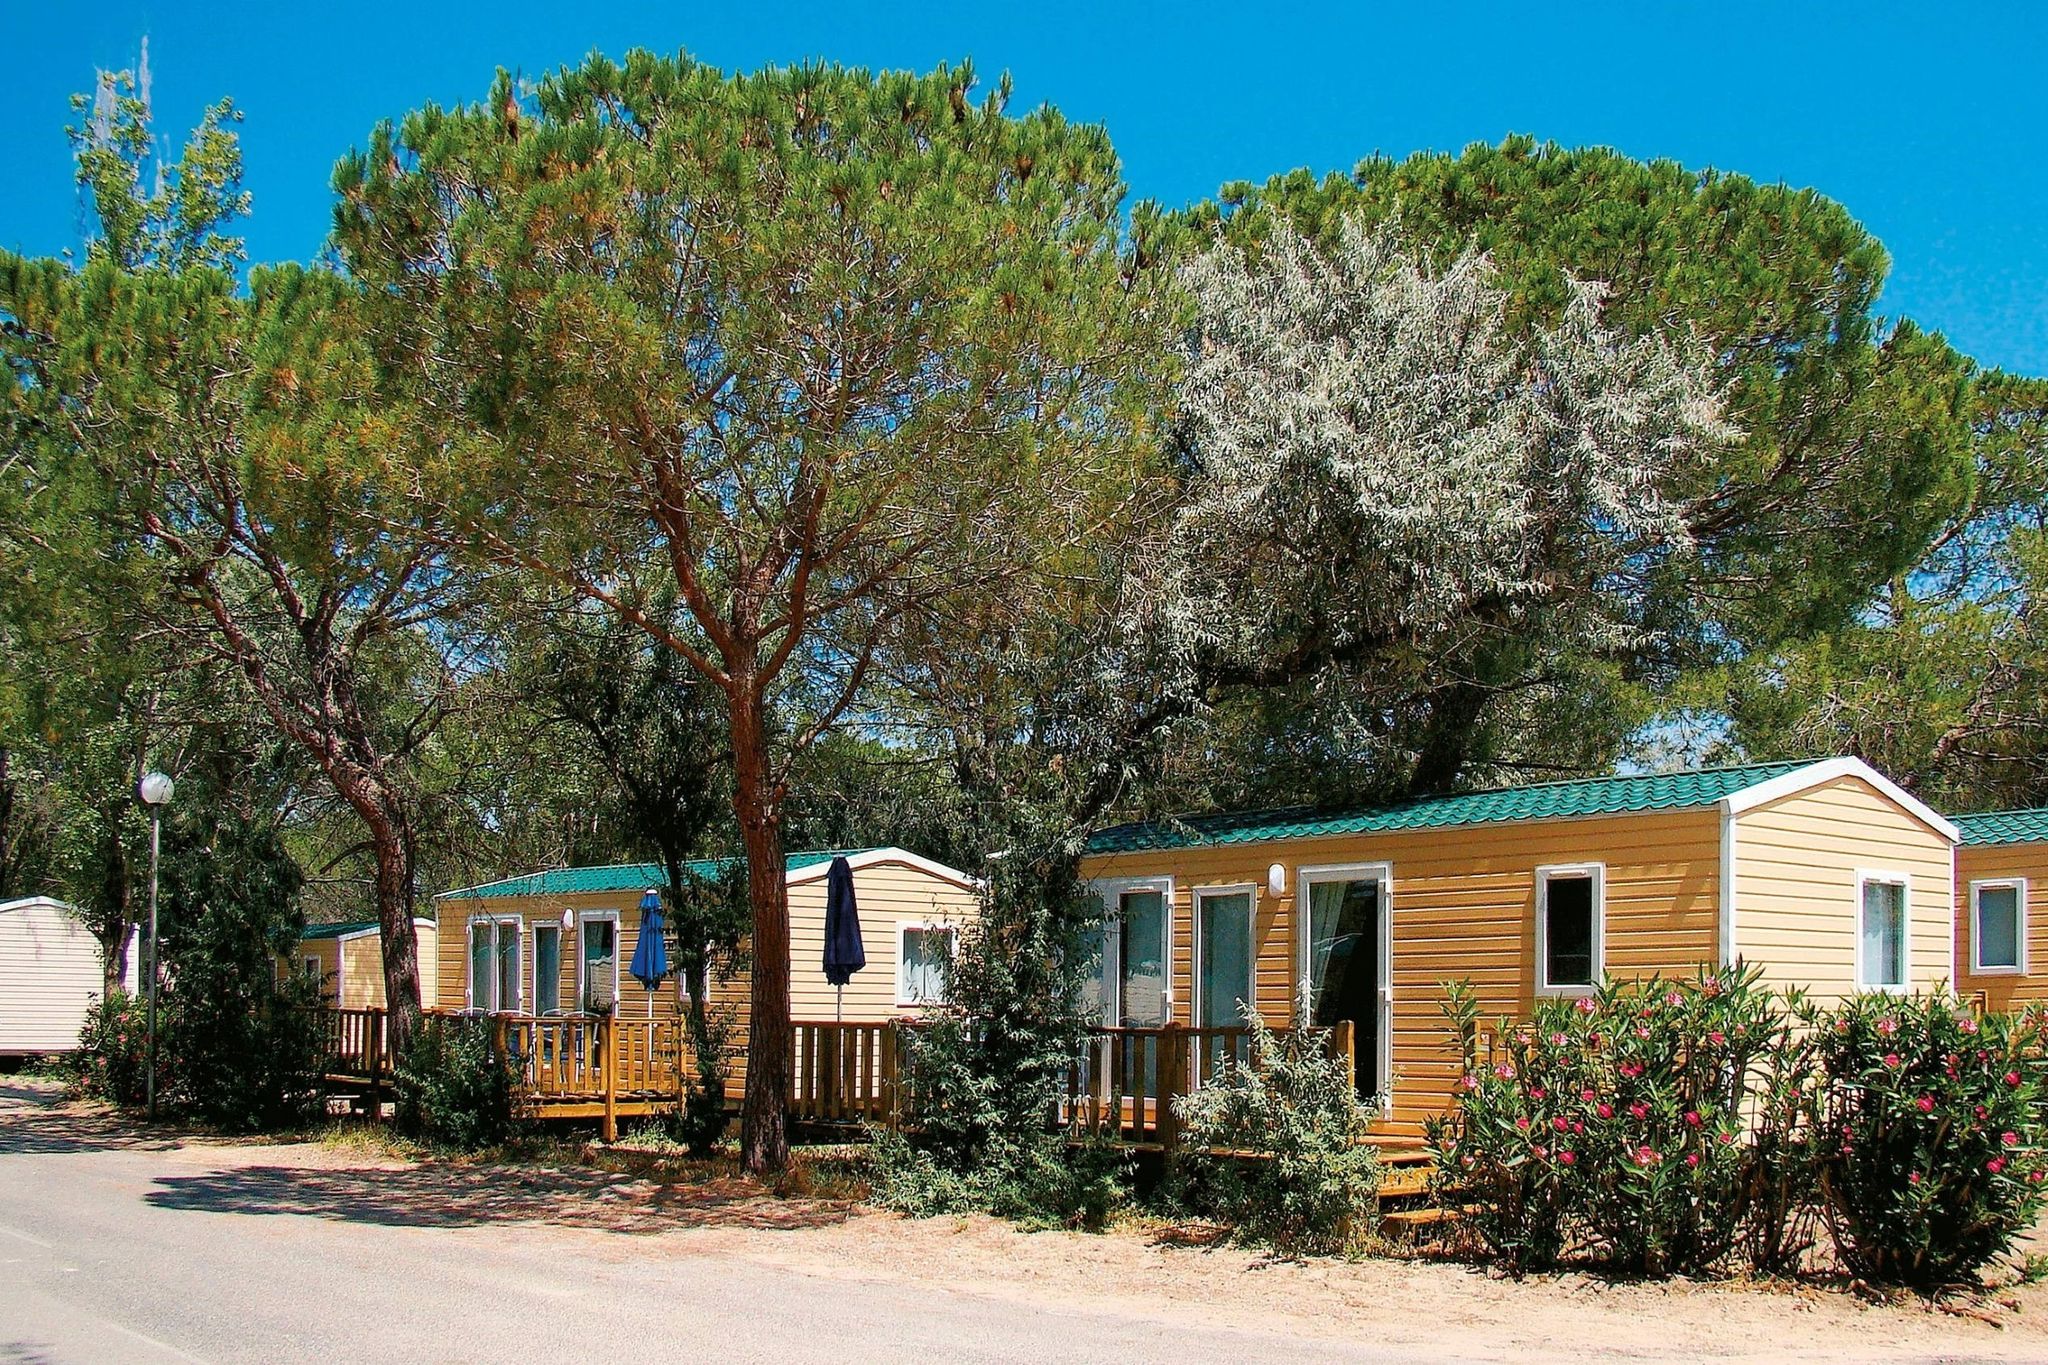 Pretty mobile home in the quaint, green Camargue surroundings